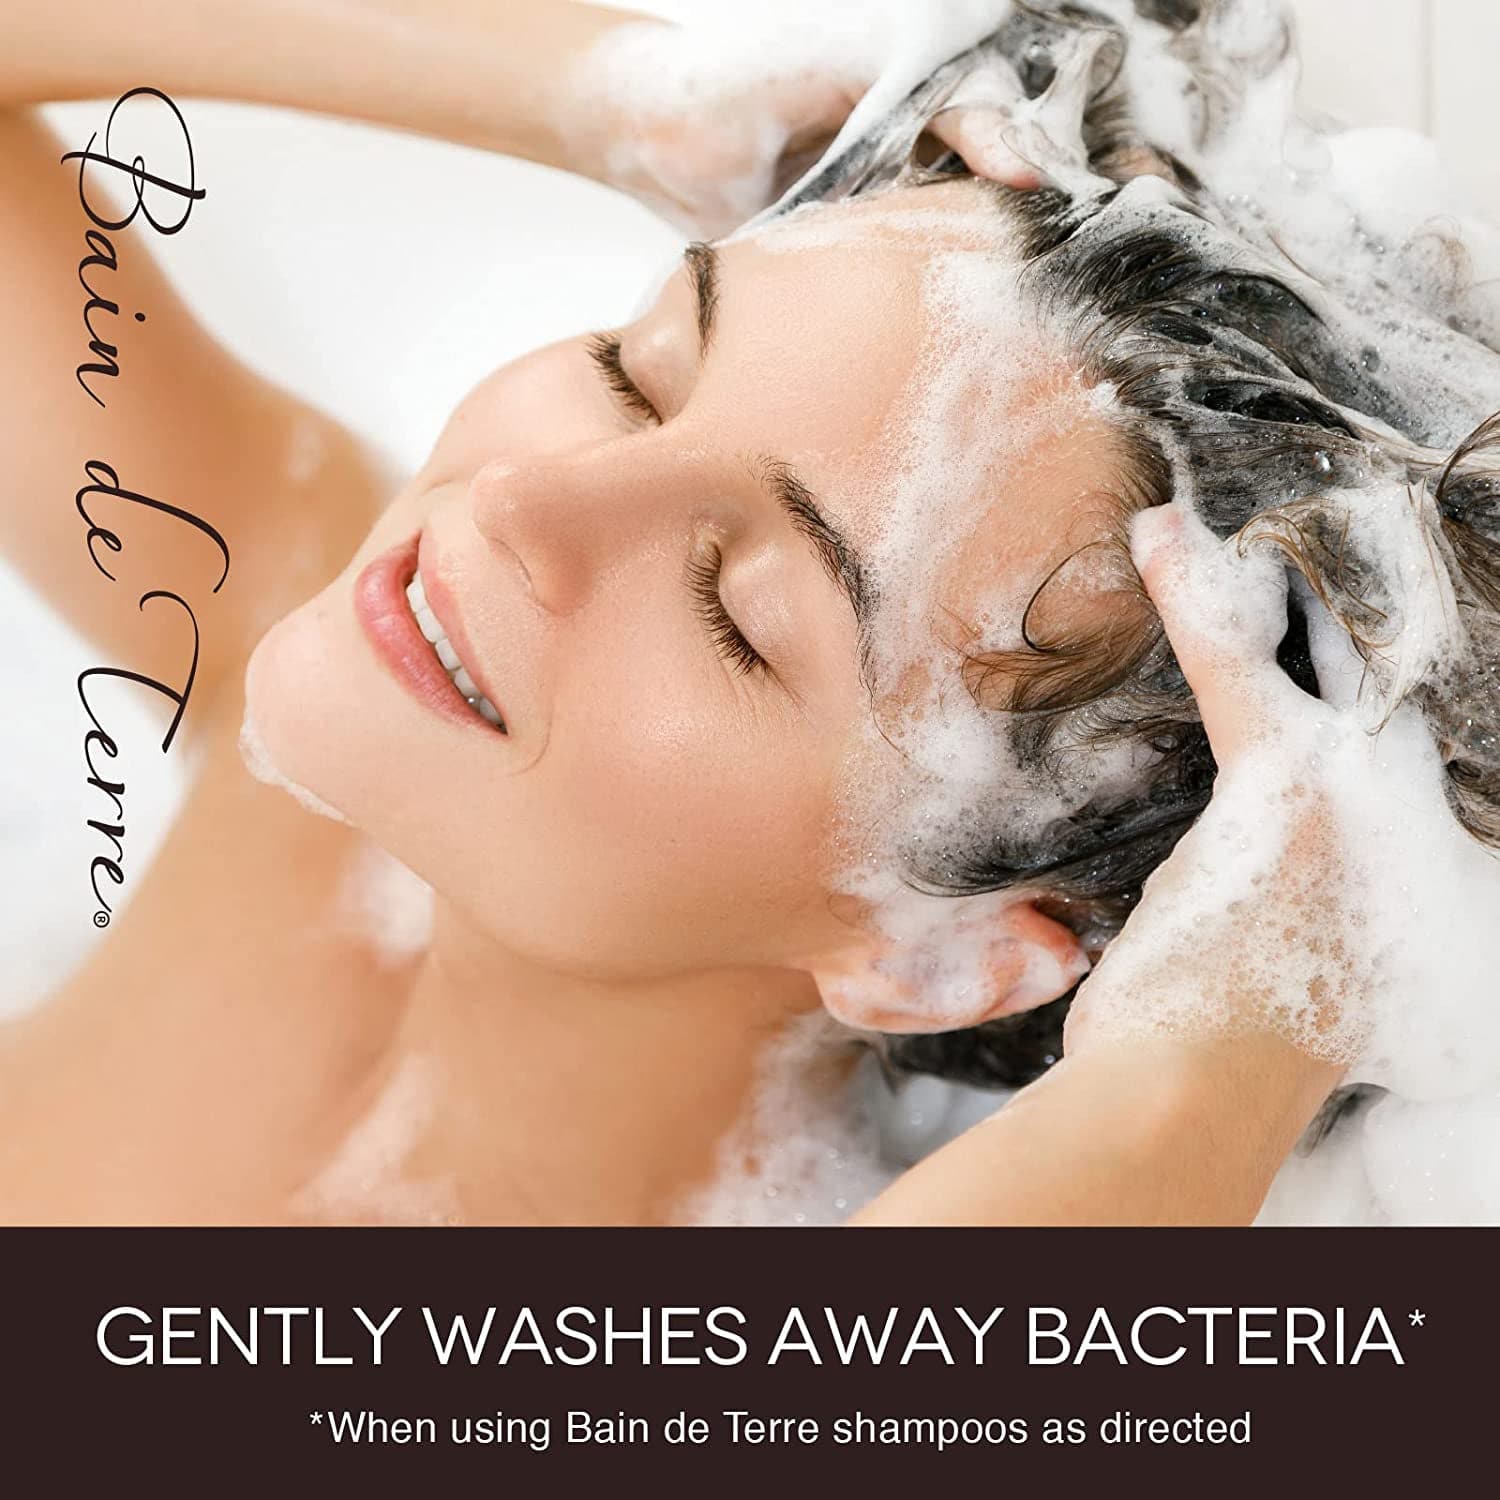 Gently Washes Away Bacteria* *When using Bain de Terre shampoos as directed